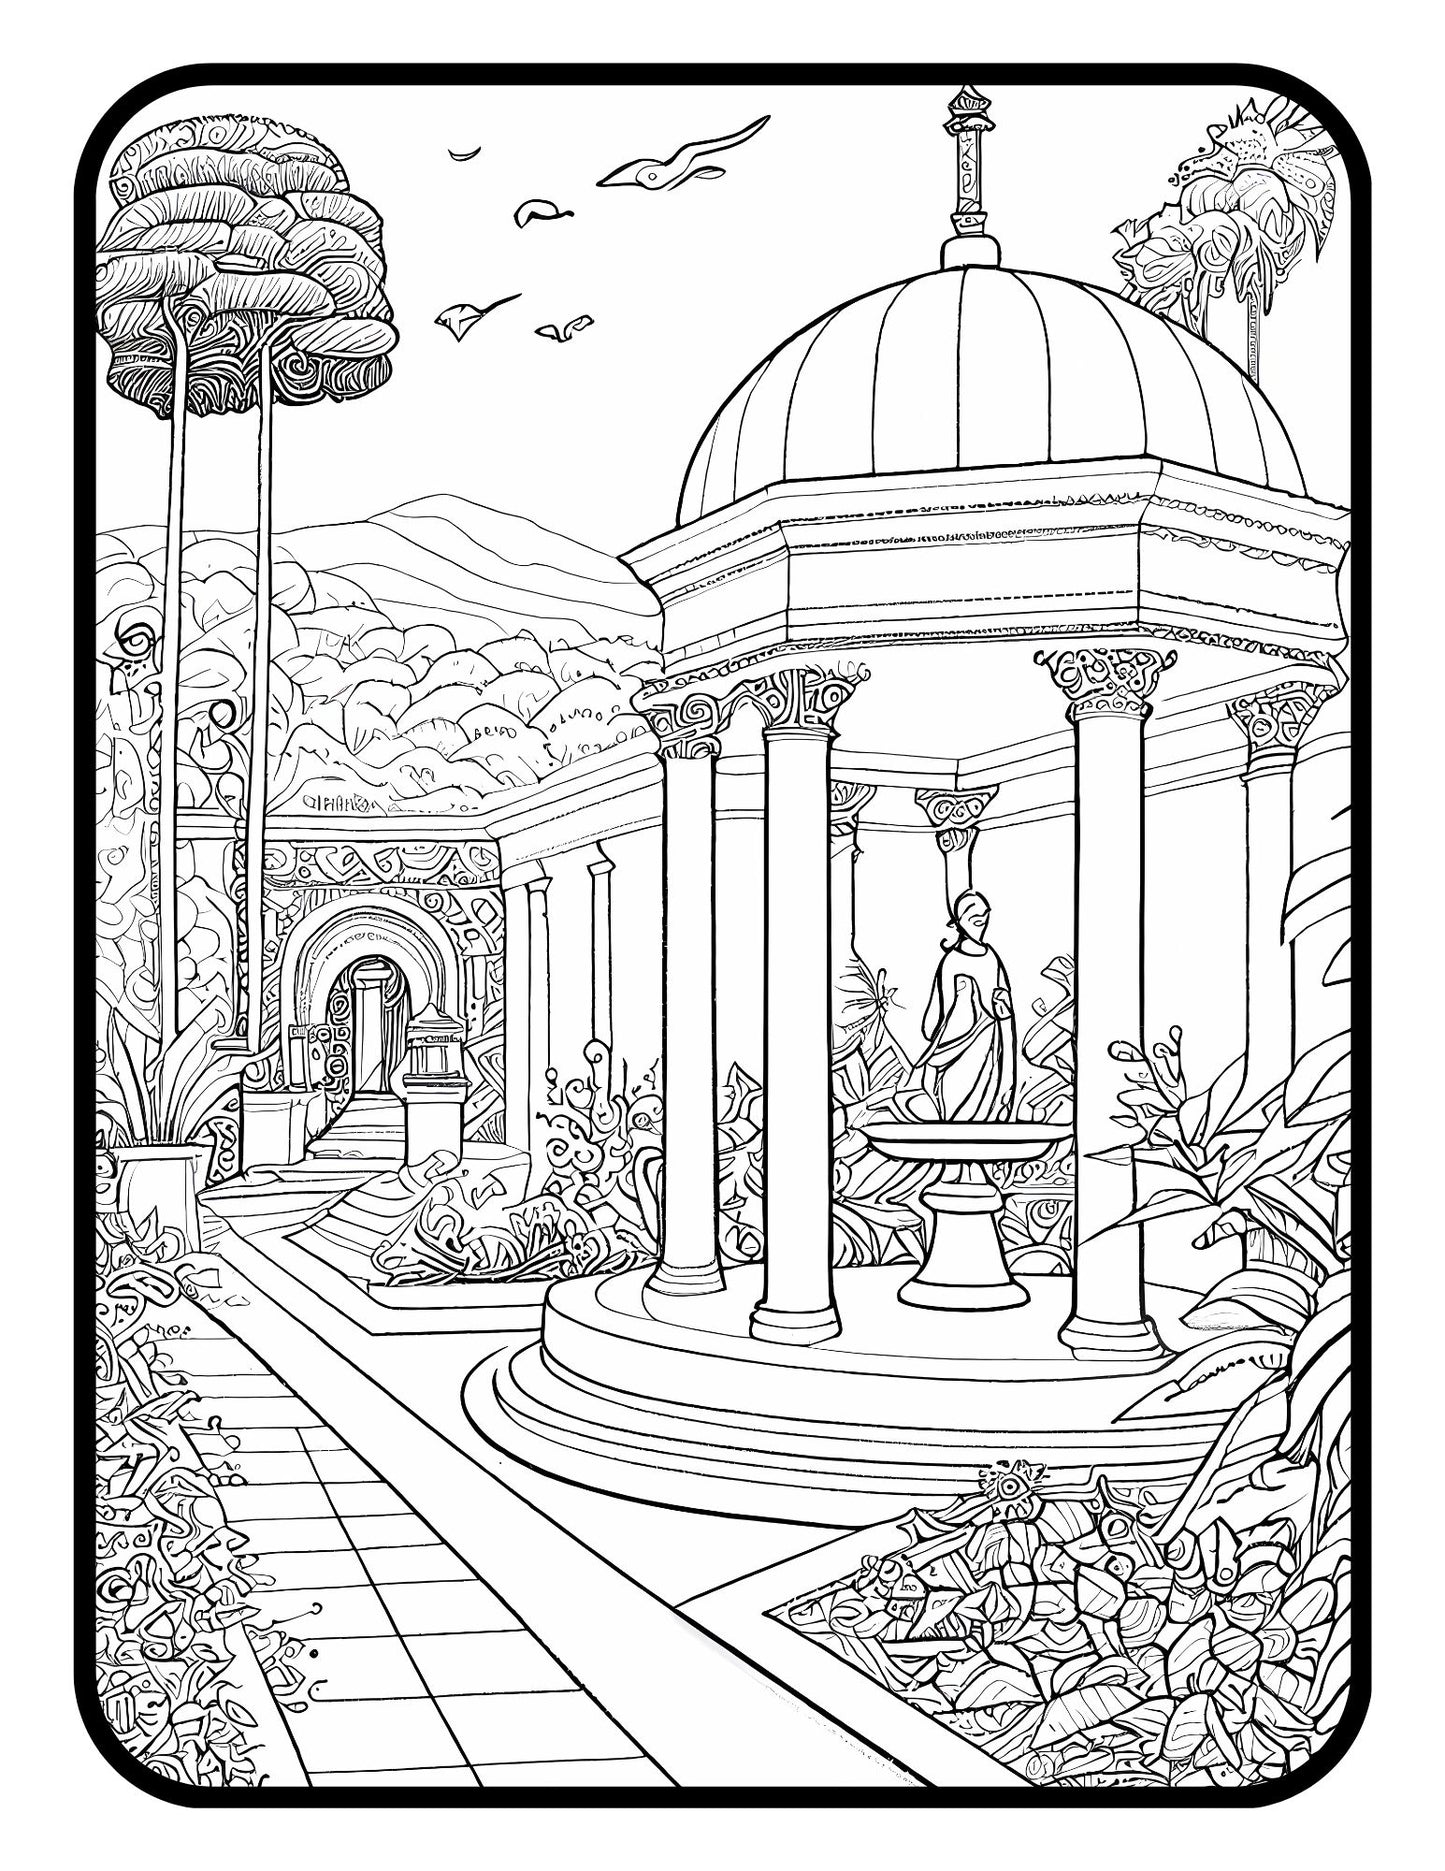 Famous Places Coloring Book For Adults Travel Coloring Book Gift Landscape Coloring Book For Adults Places Coloring Book Relaxation Gift